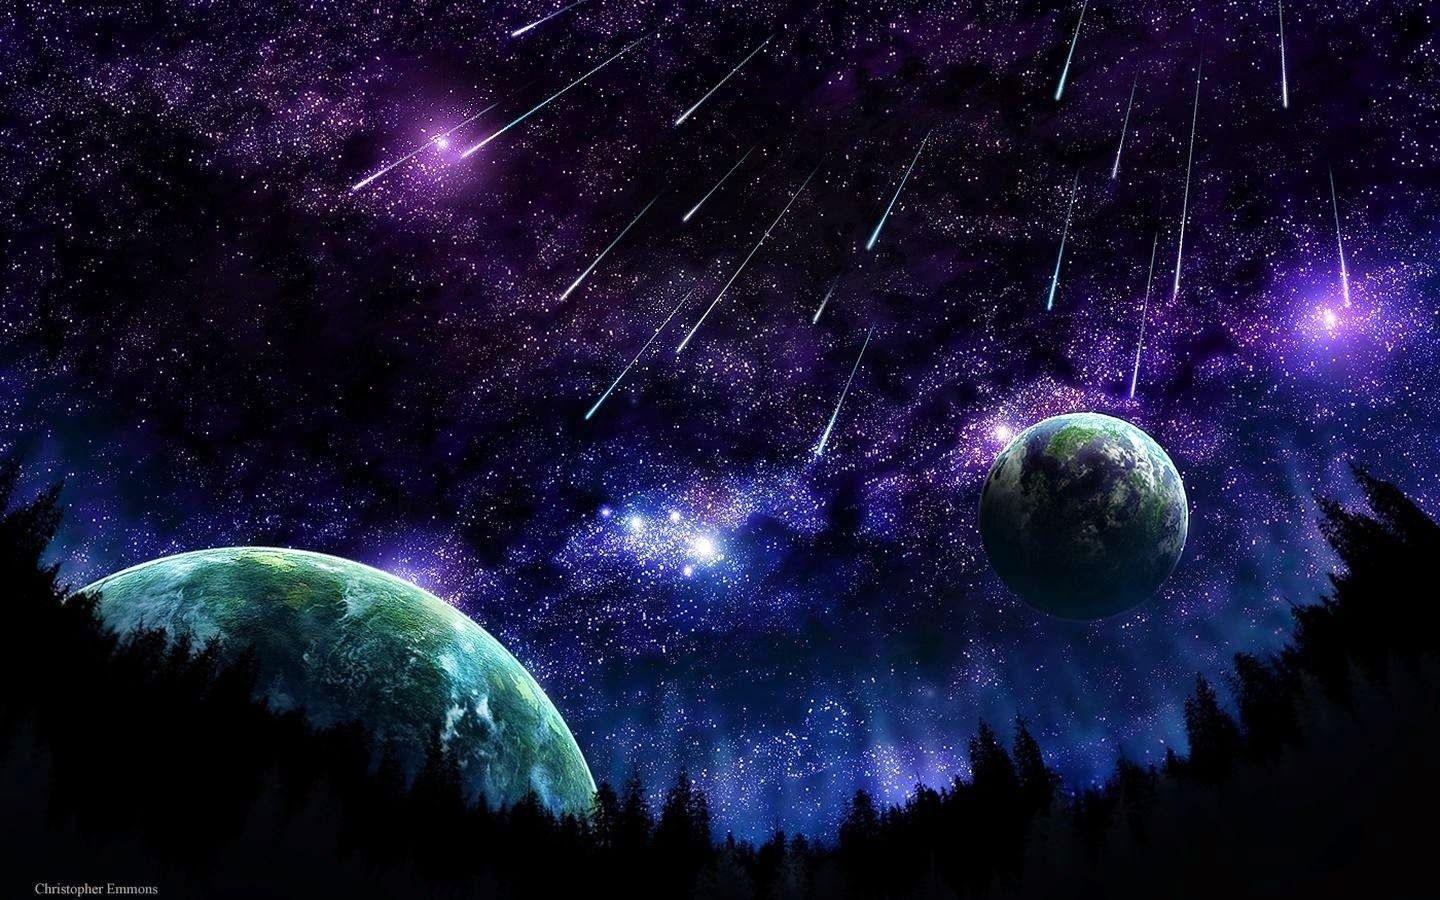 Trippy Space Wallpaper. Outer space